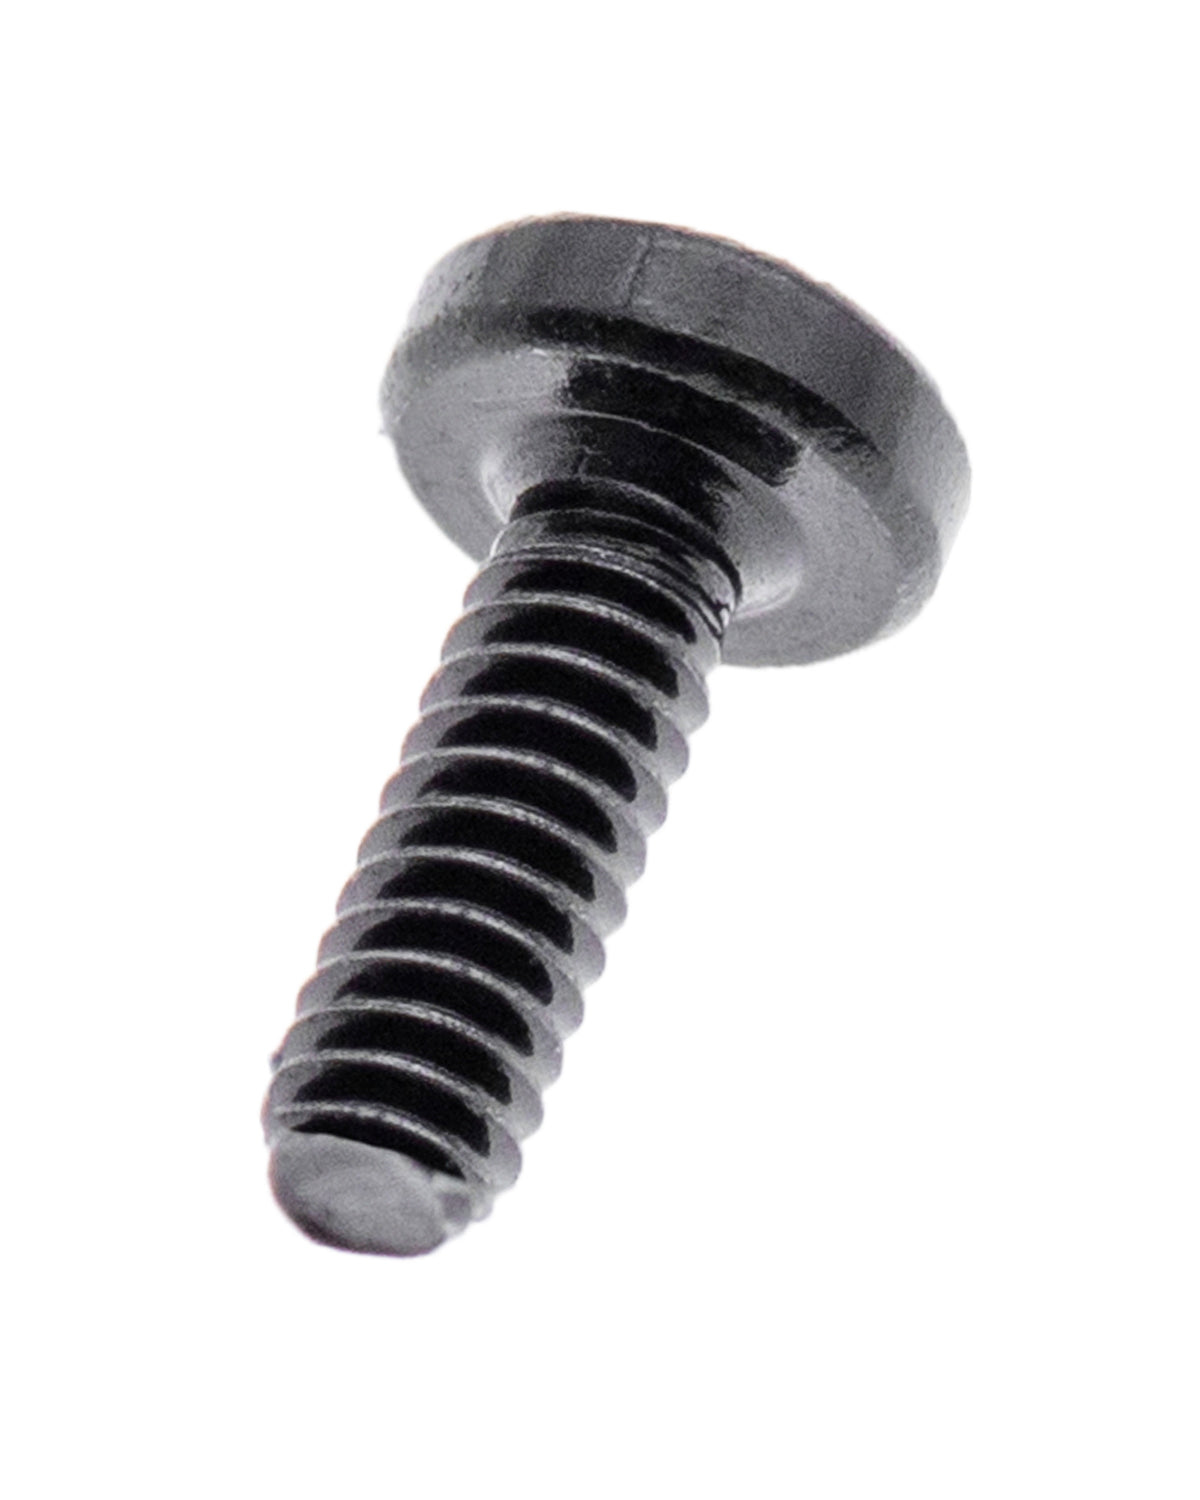 TRACKPAD SCREWS (TORX T3) (10 PIECES SET)  FOR MACBOOK PRO 13" W/ TOUCH BAR A1706 / A1708 / A1989 / A2159 / A2289 / A2251 / A2338 ( LATE 2016 TO LATE 2020)